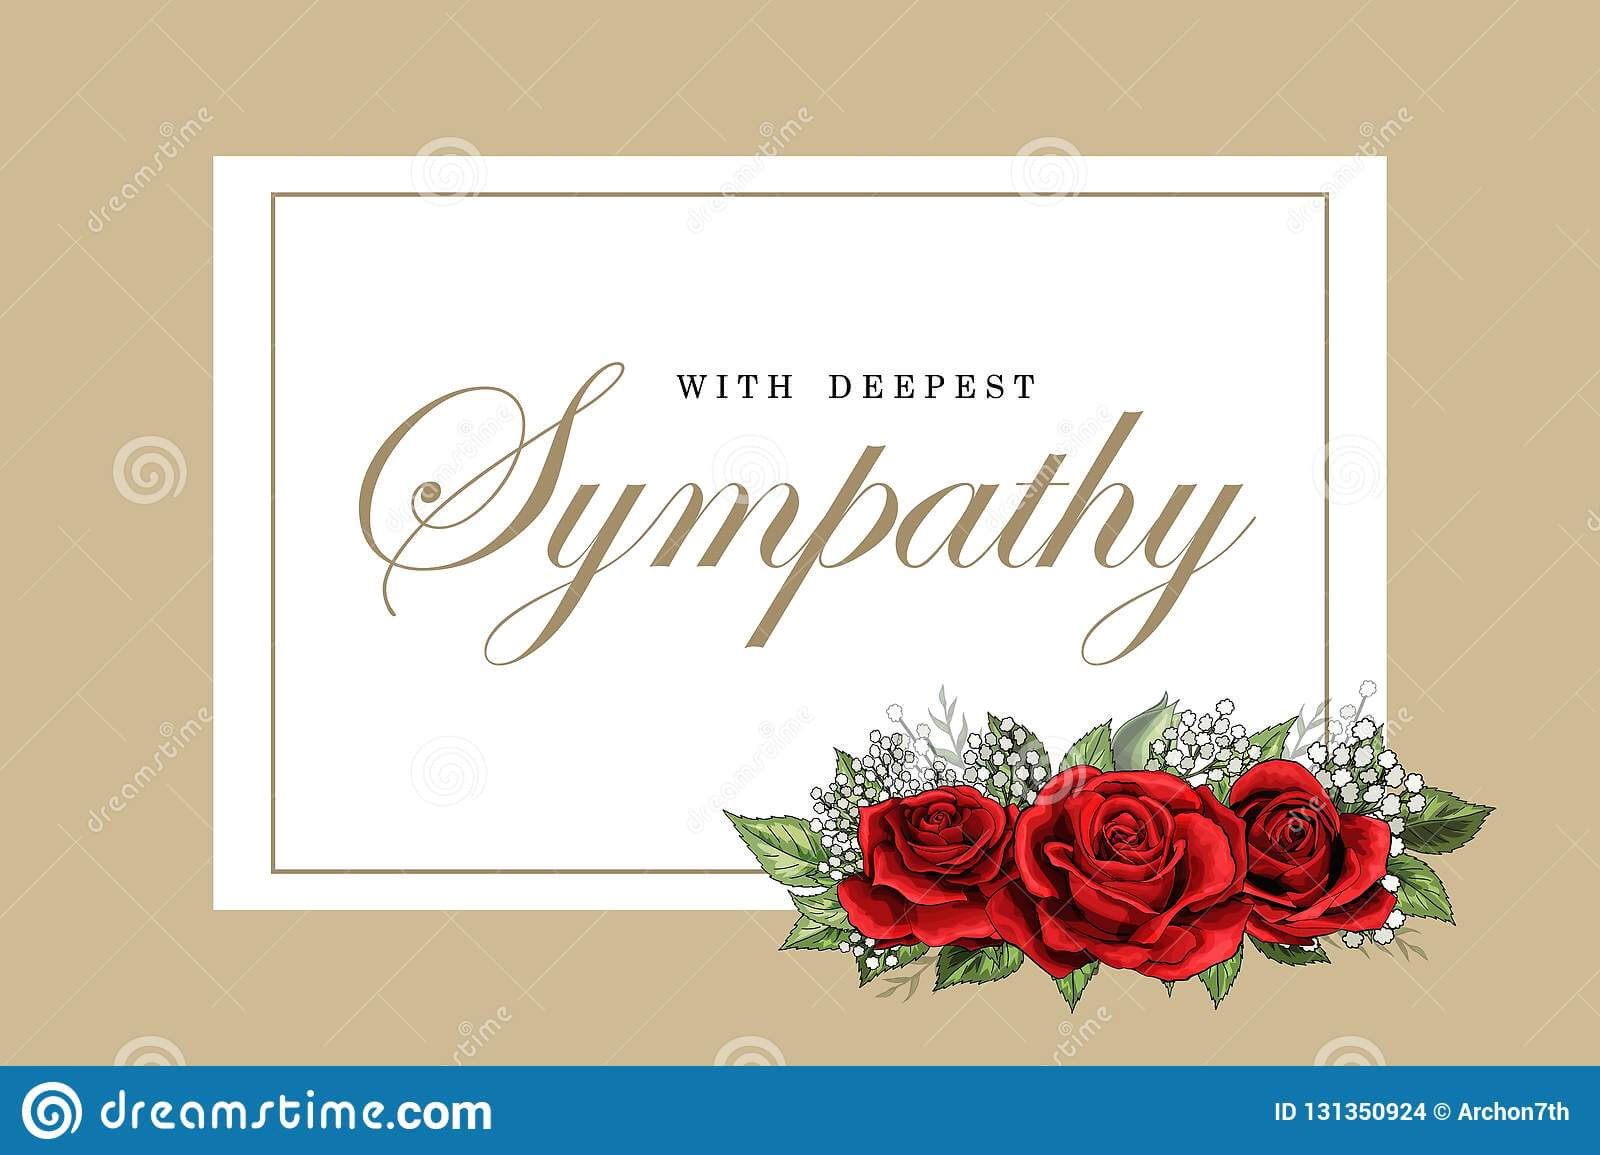 Condolences Sympathy Card Floral Red Roses Bouquet And For Sympathy Card Template